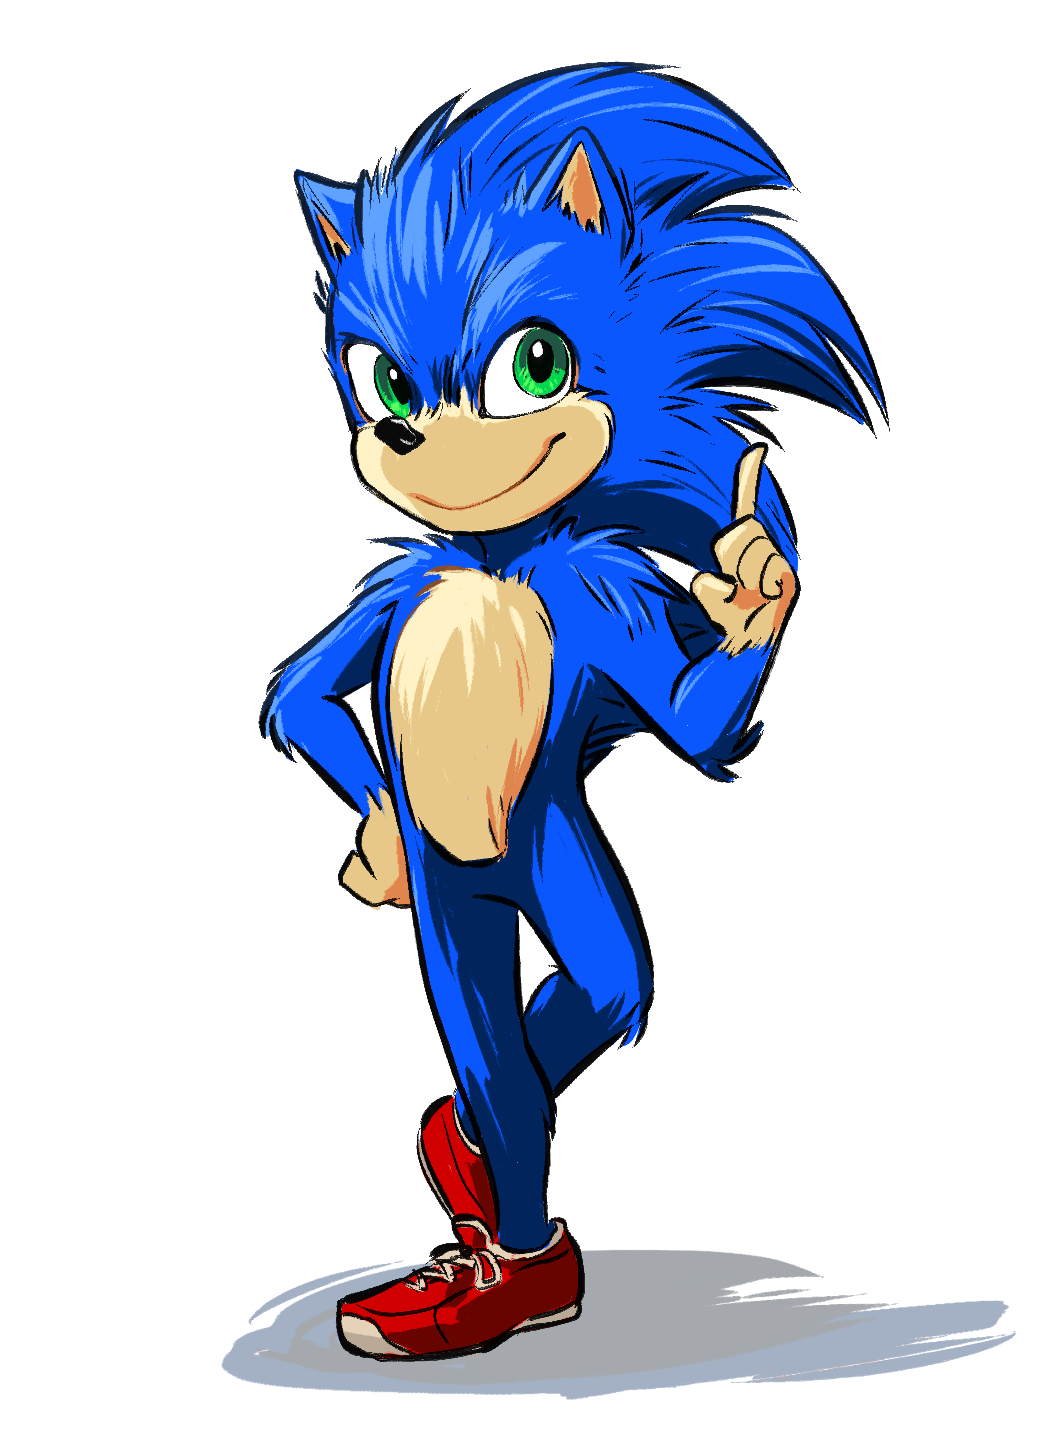 Here's more fan art of what sonic could look like in the movie : SonicTheHedgehog1045 x 1431